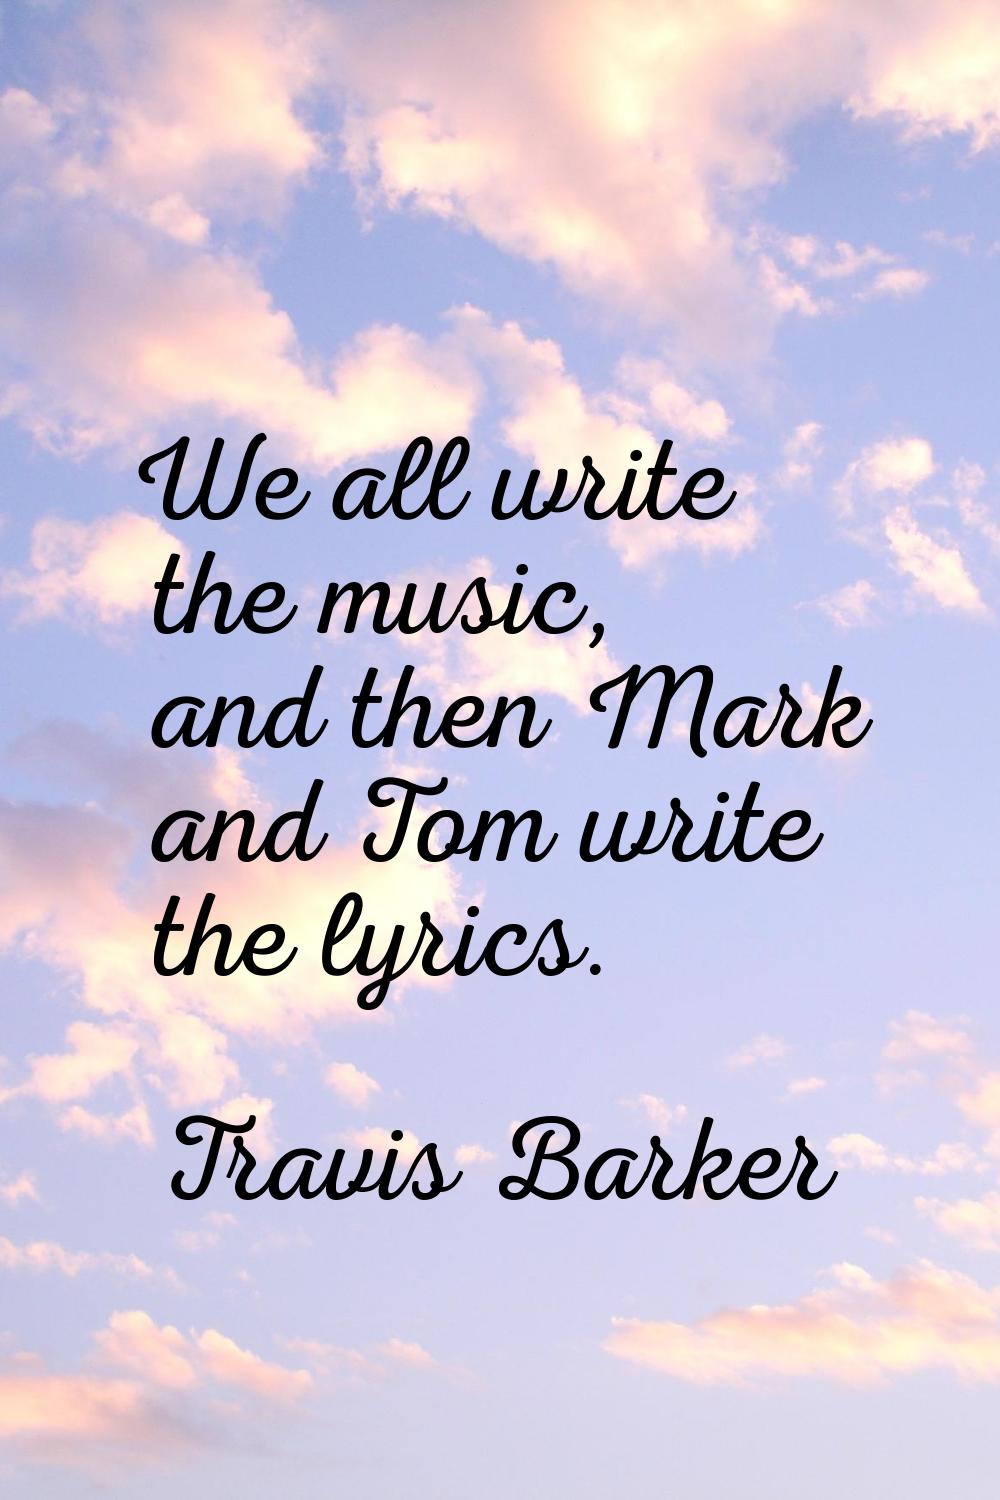 We all write the music, and then Mark and Tom write the lyrics.